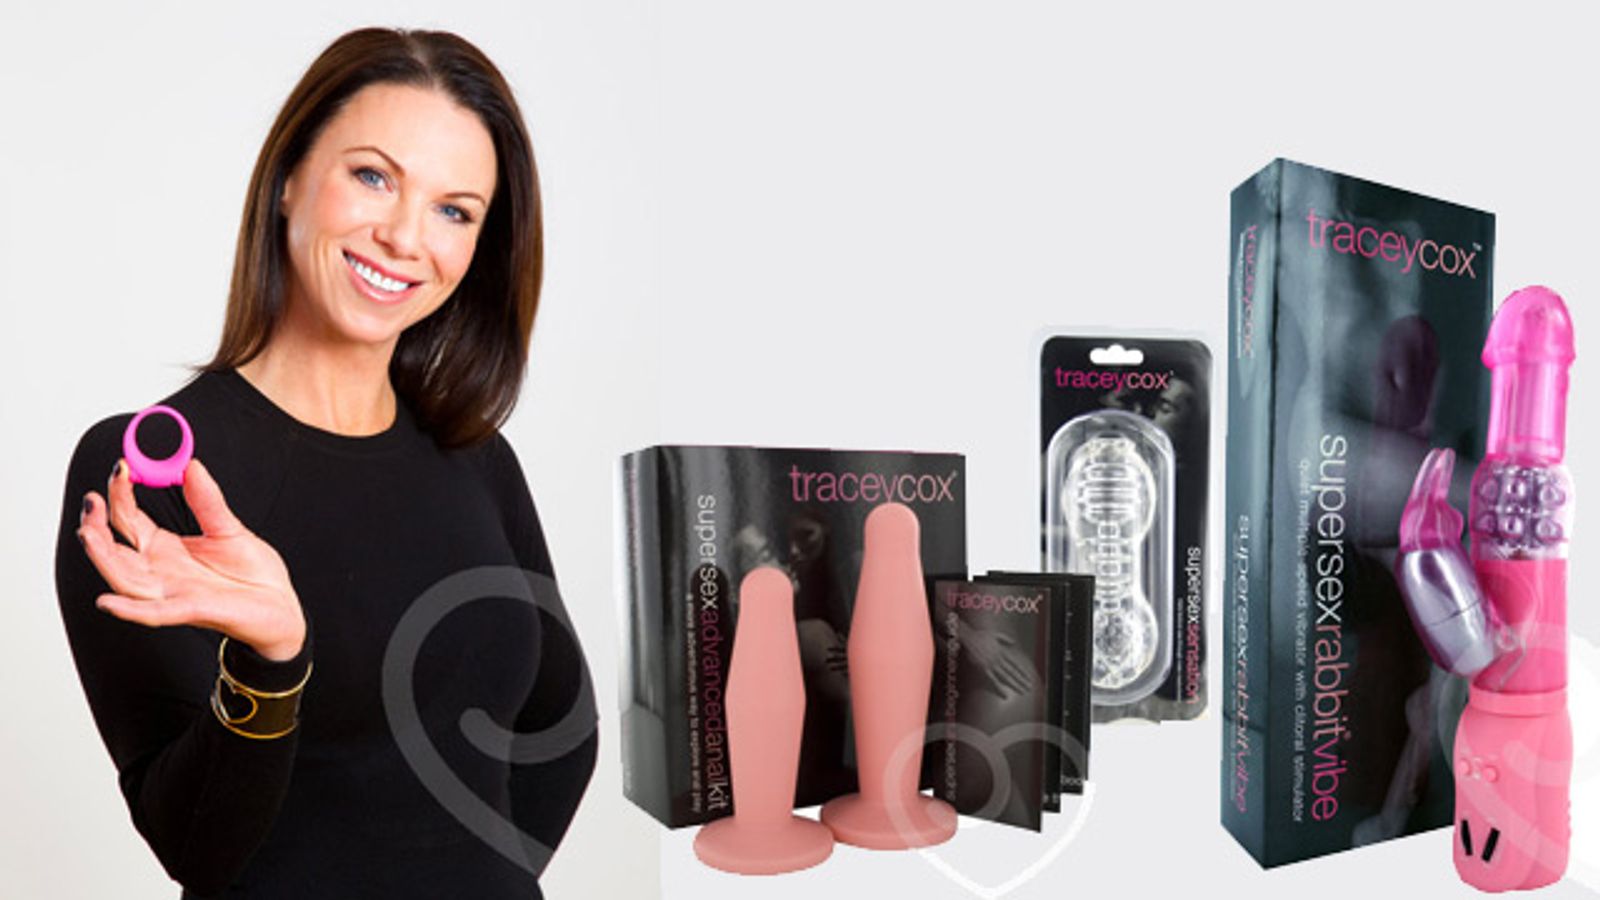 LoveHoney Bringing Tracey Cox Toys to U.S. Consumers